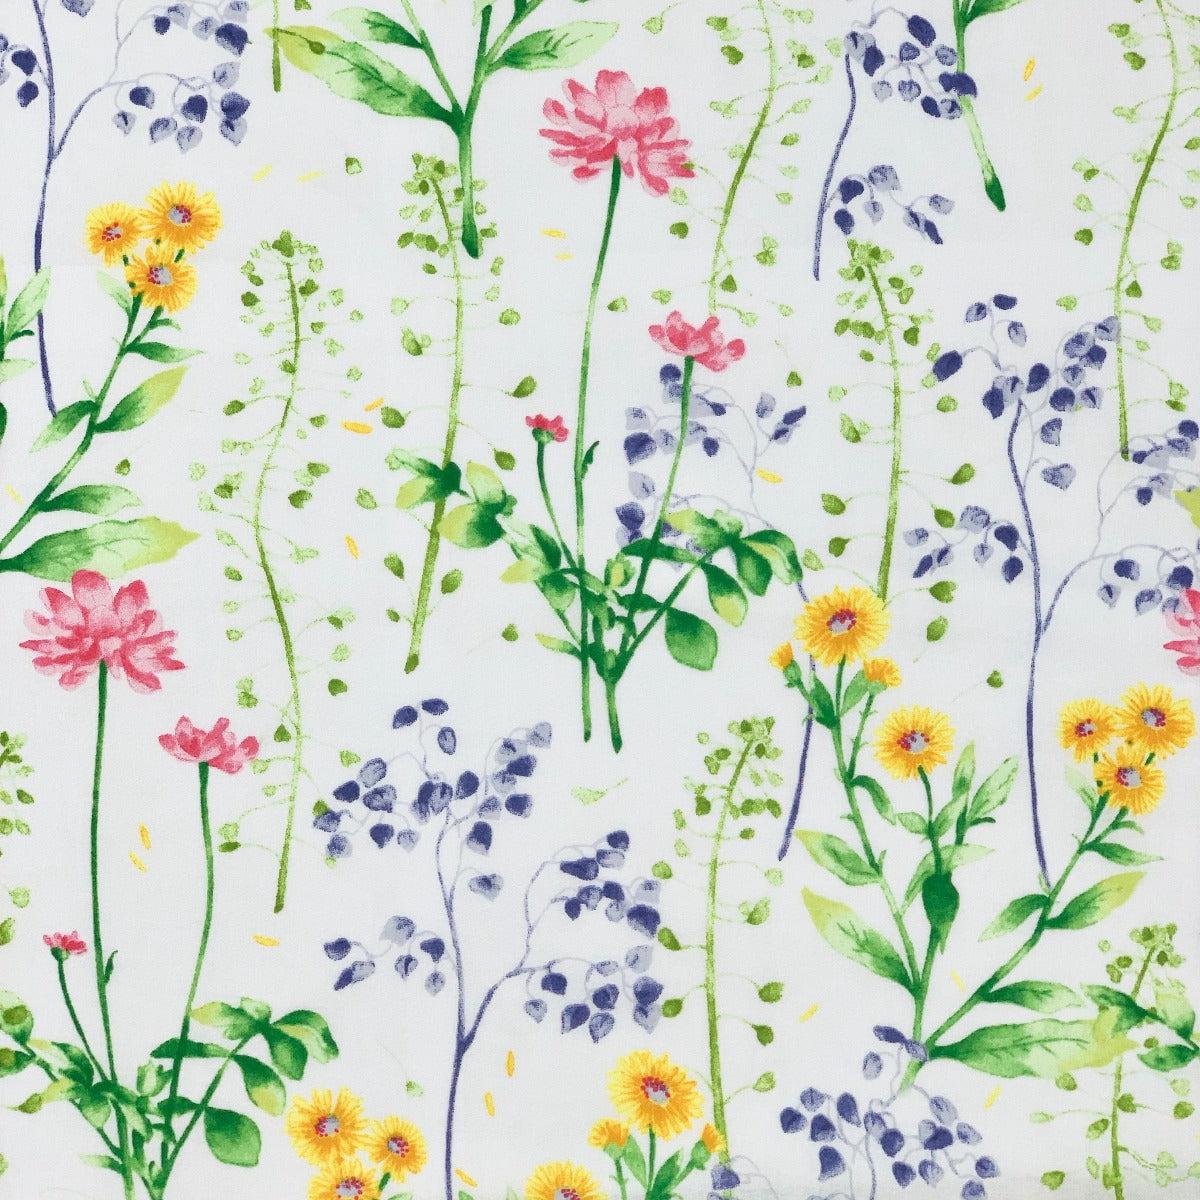 Kokka-Bright Watercolor Stems on Cotton Lawn-fabric-gather here online